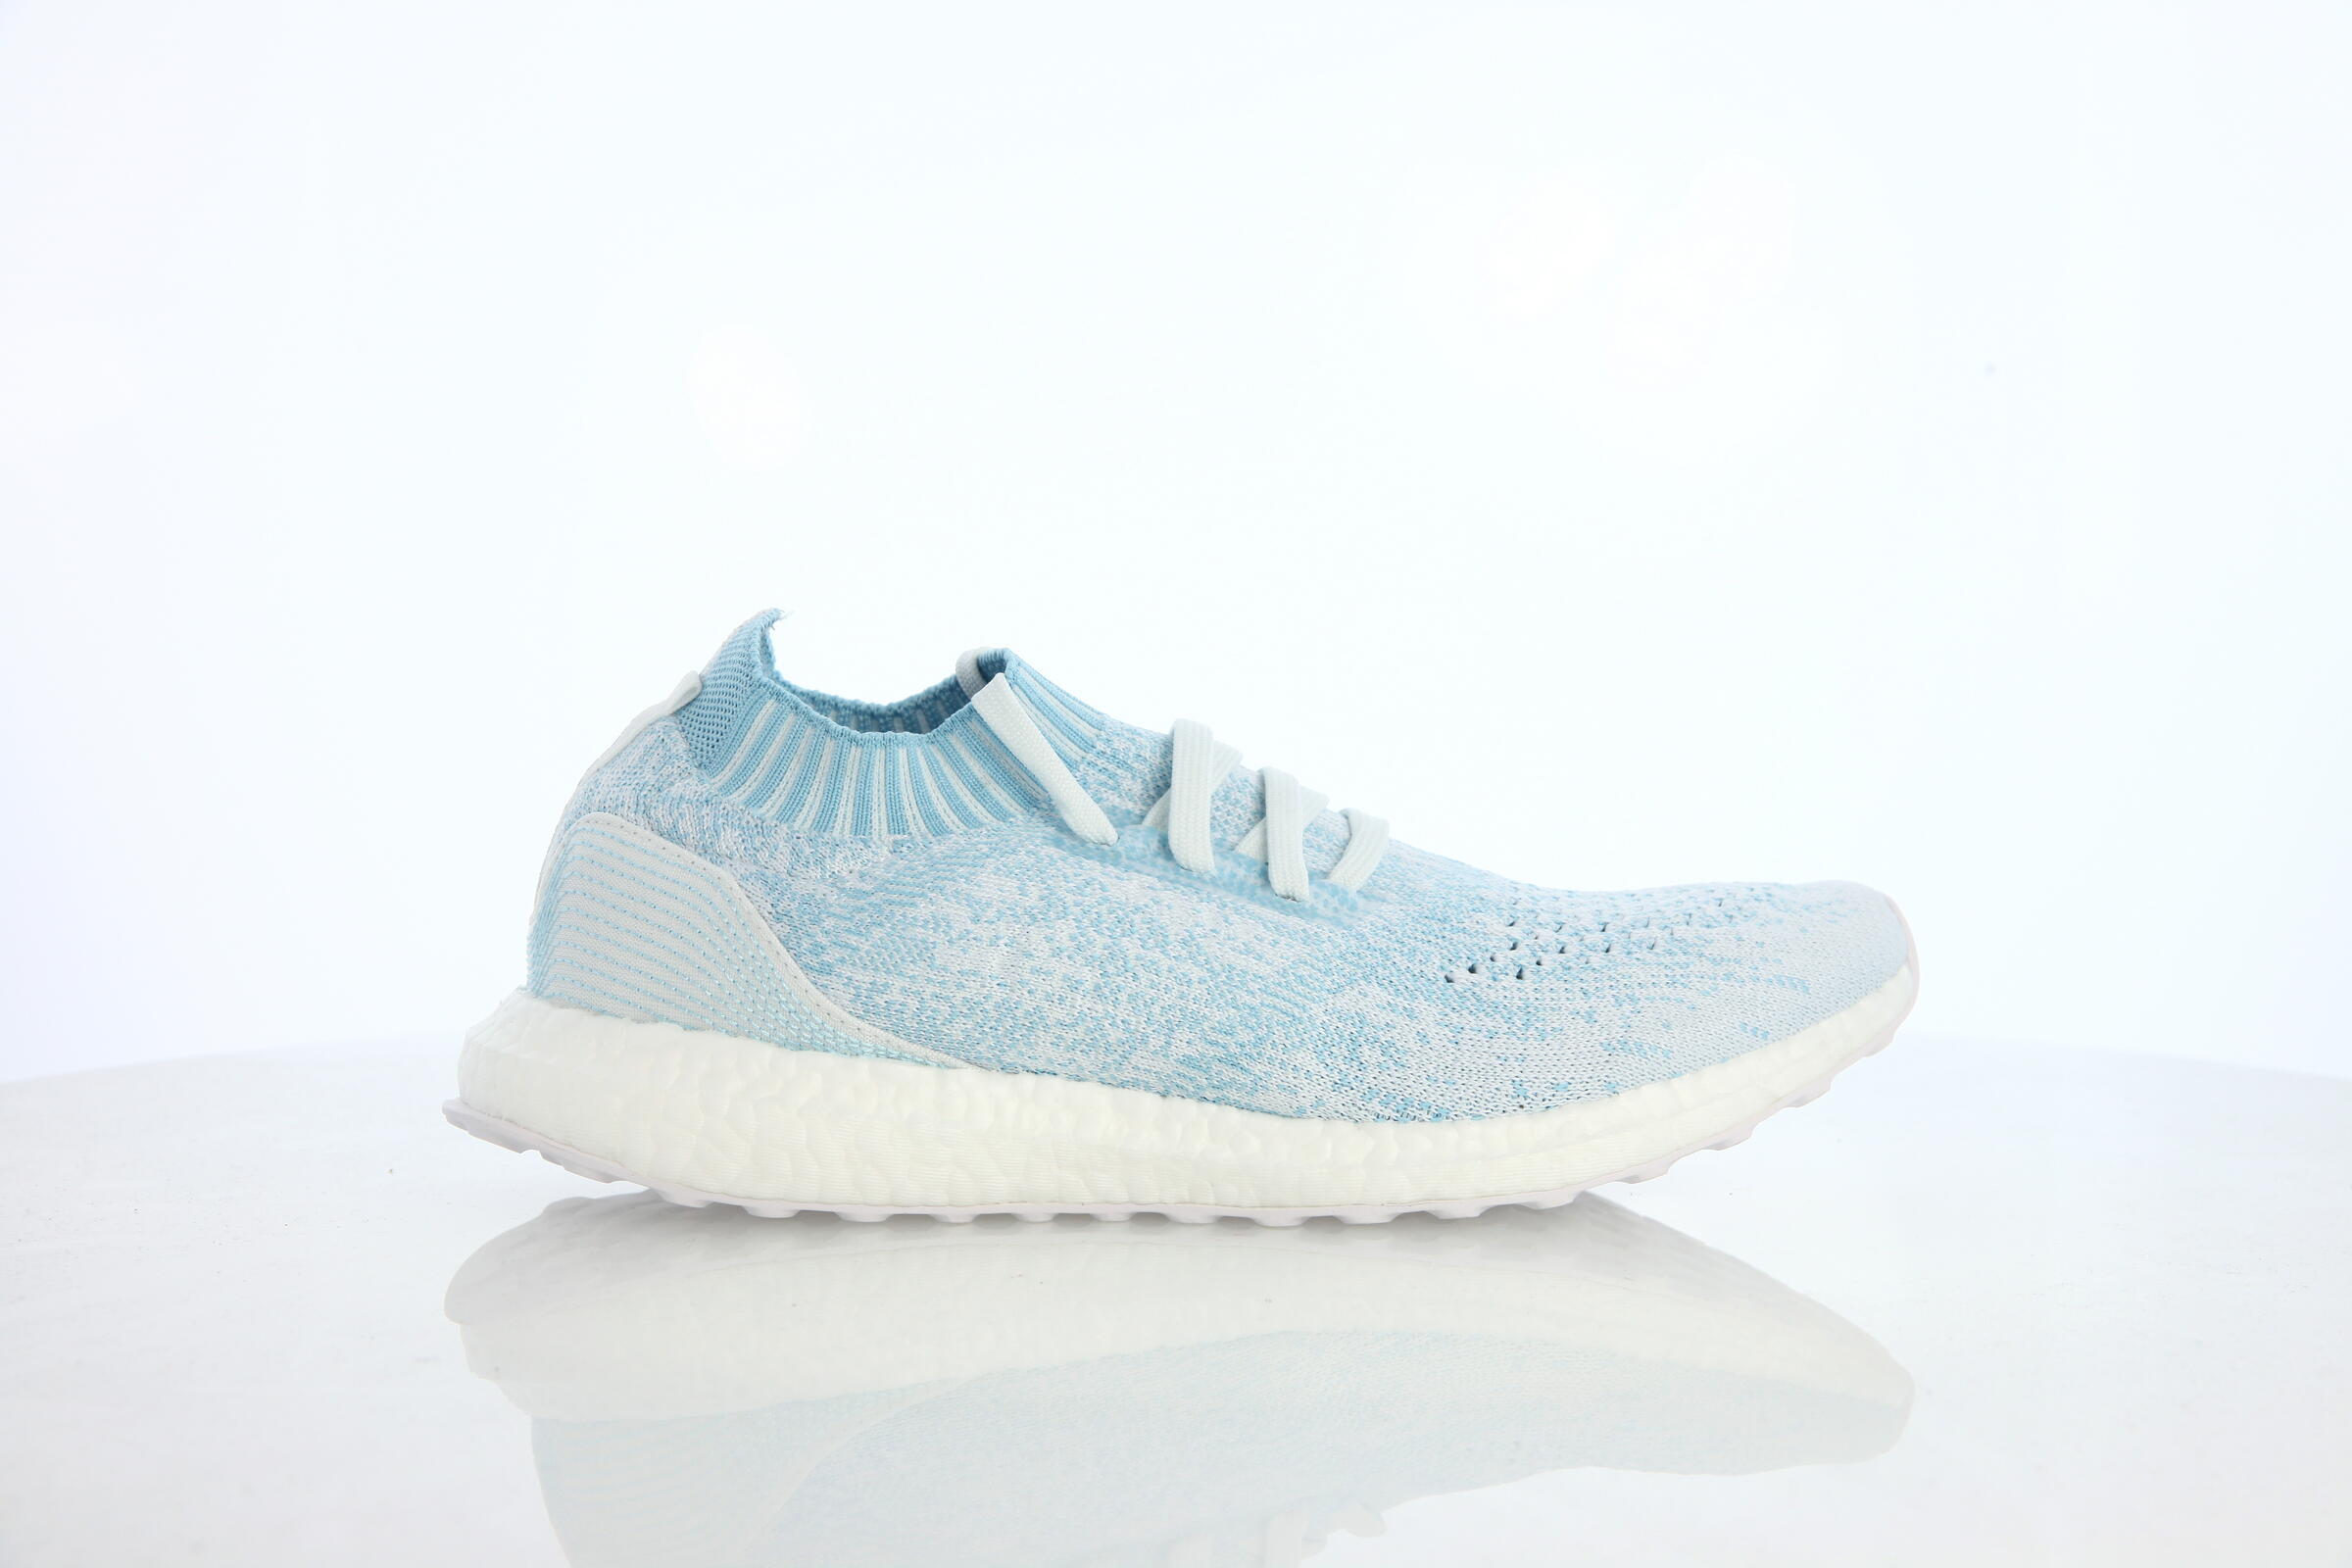 adidas Performance Ultraboost Uncaged x Parley